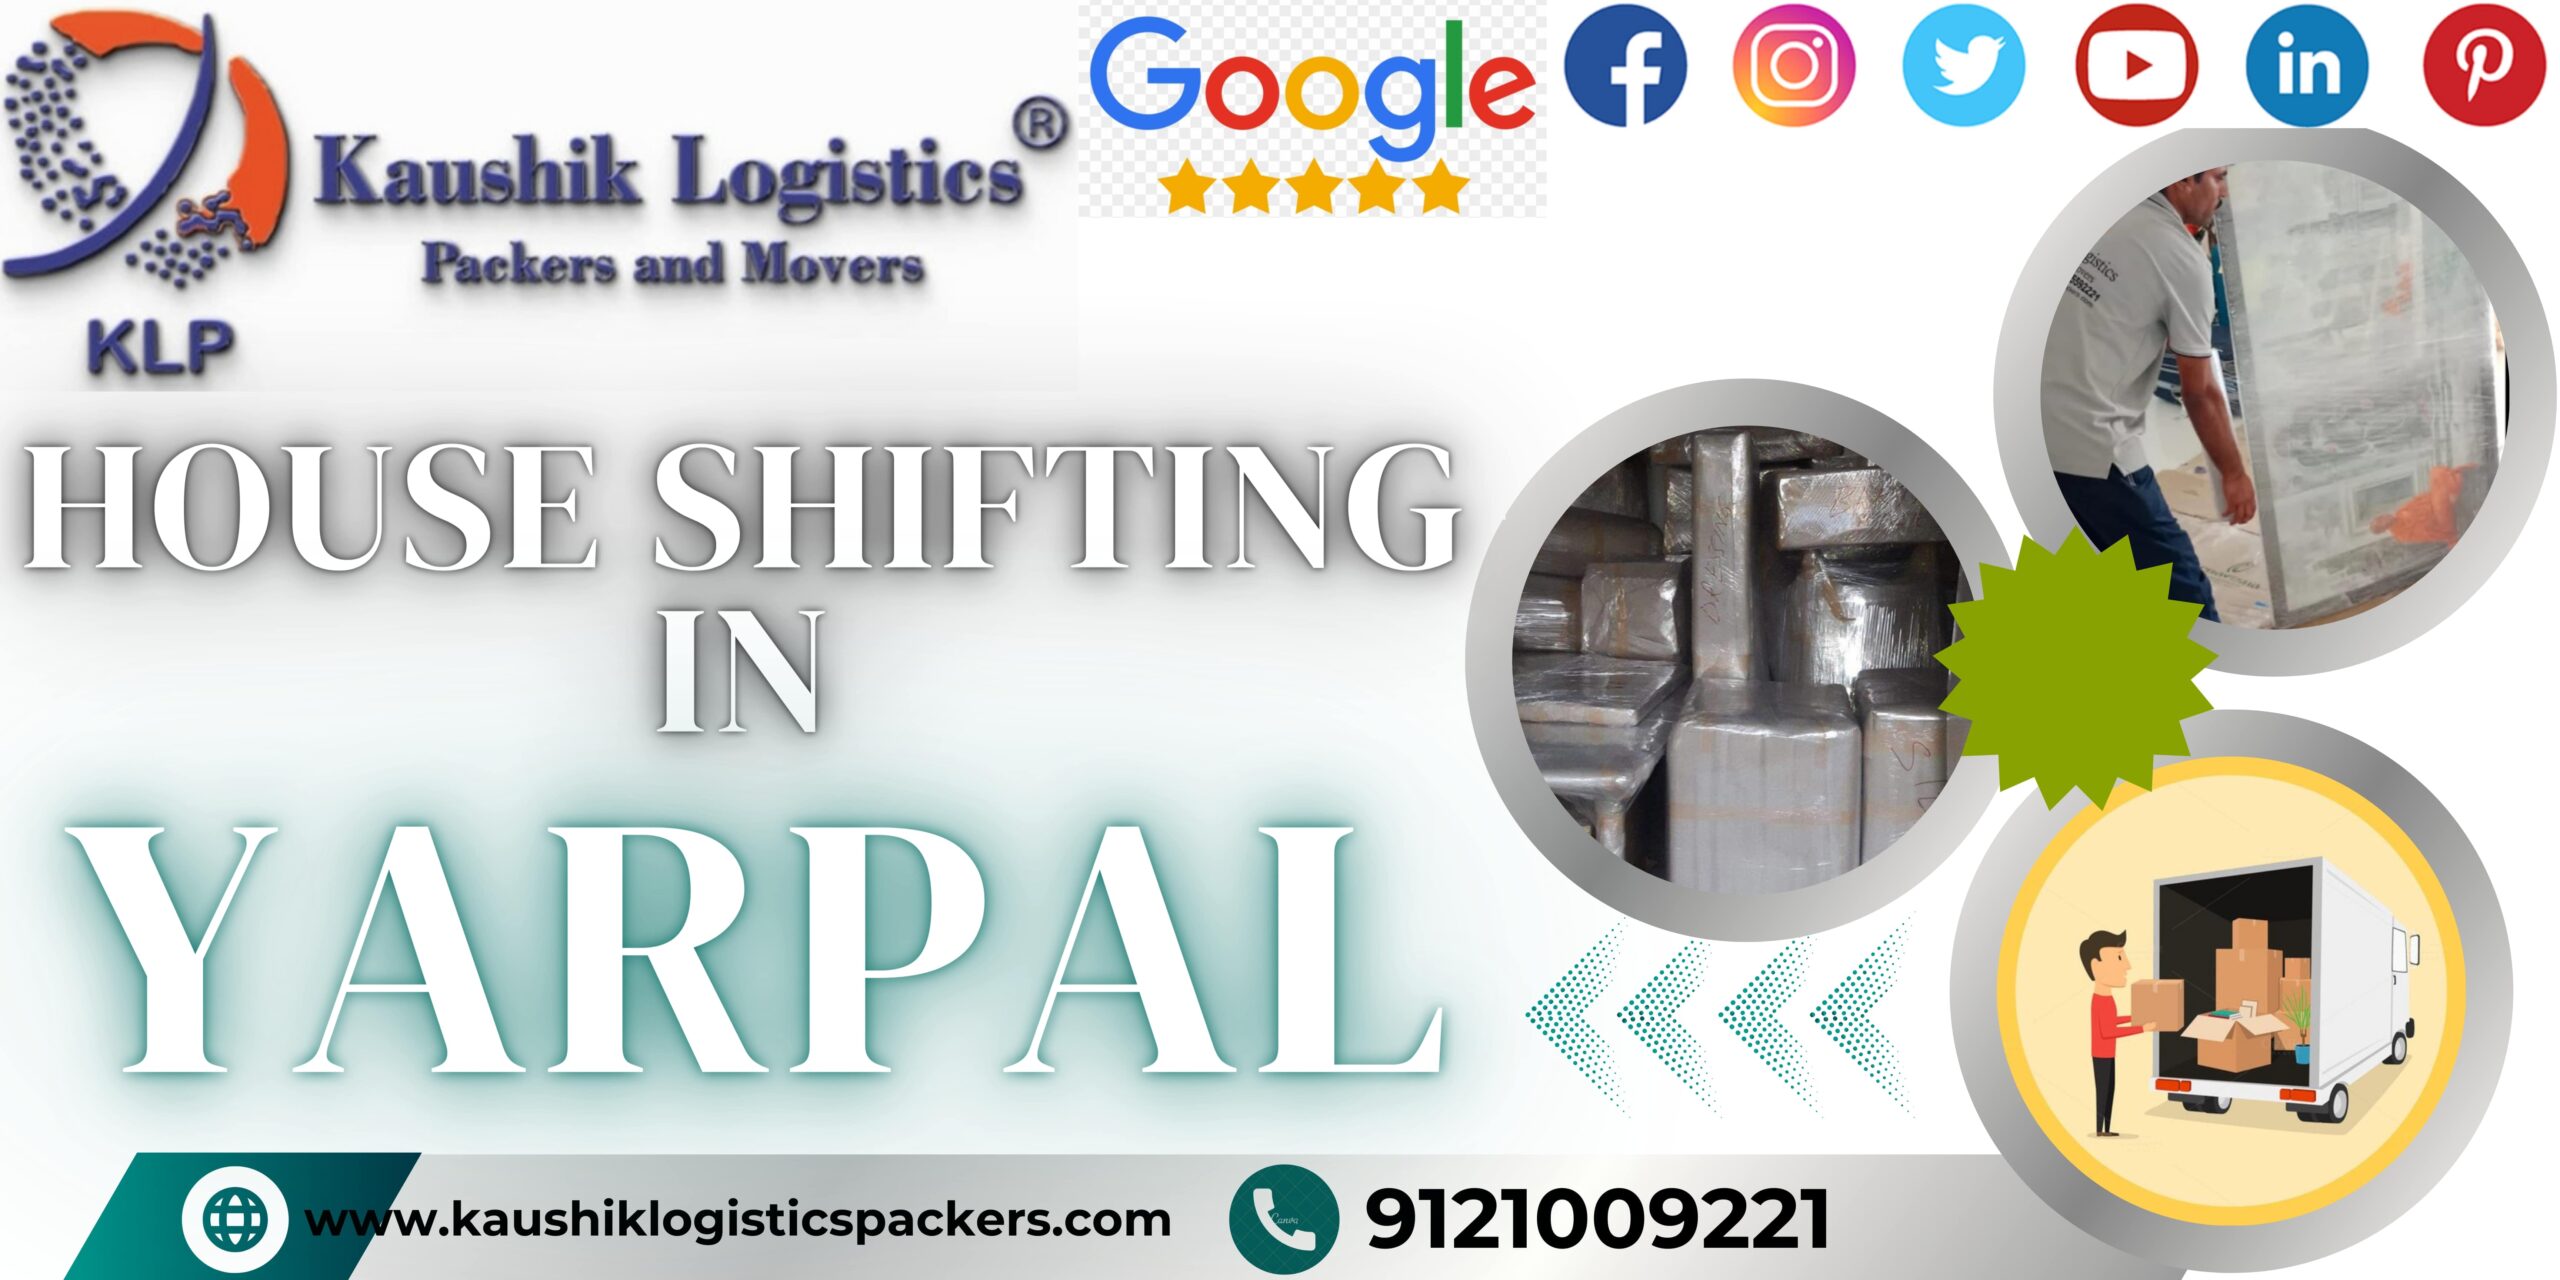 Packers and Movers In Yapral